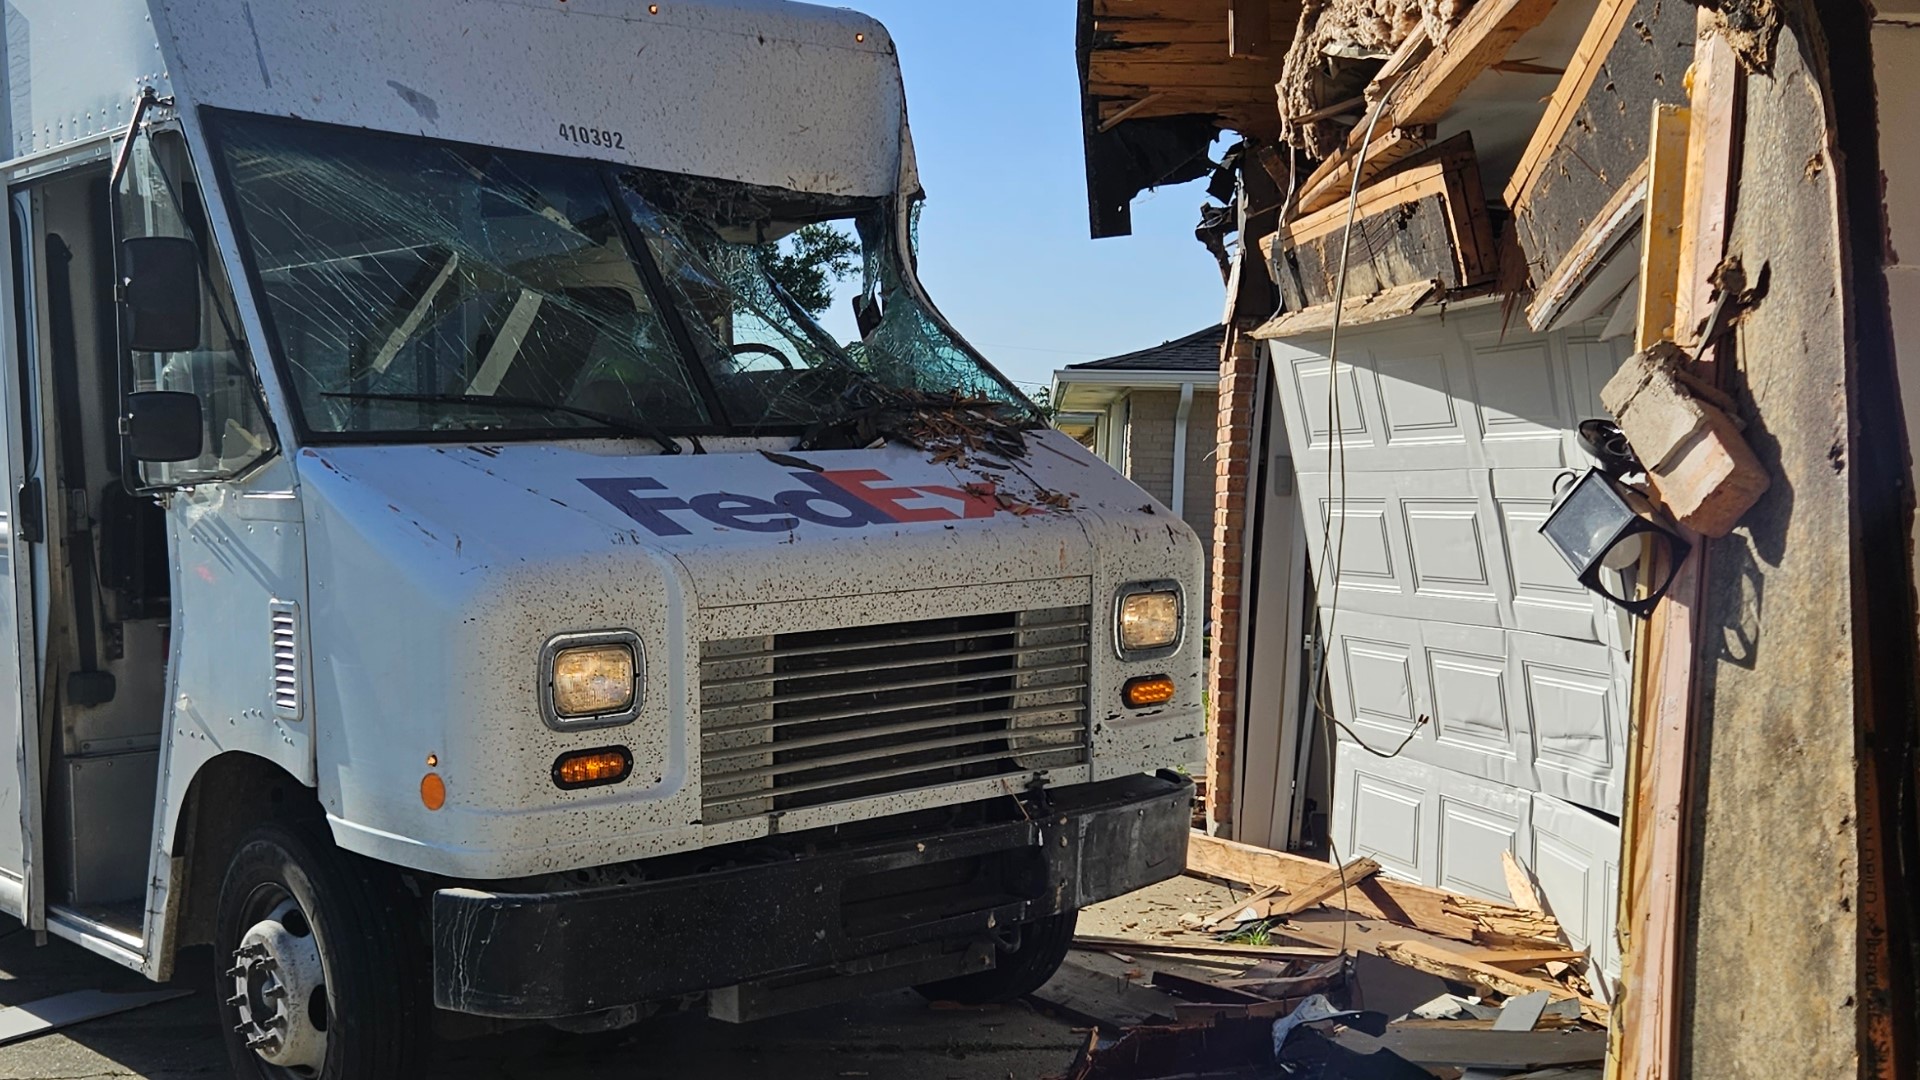 When police officers arrived, they found the delivery truck smashed through the front of the home, which was occupied at the time, but no one inside was injured.